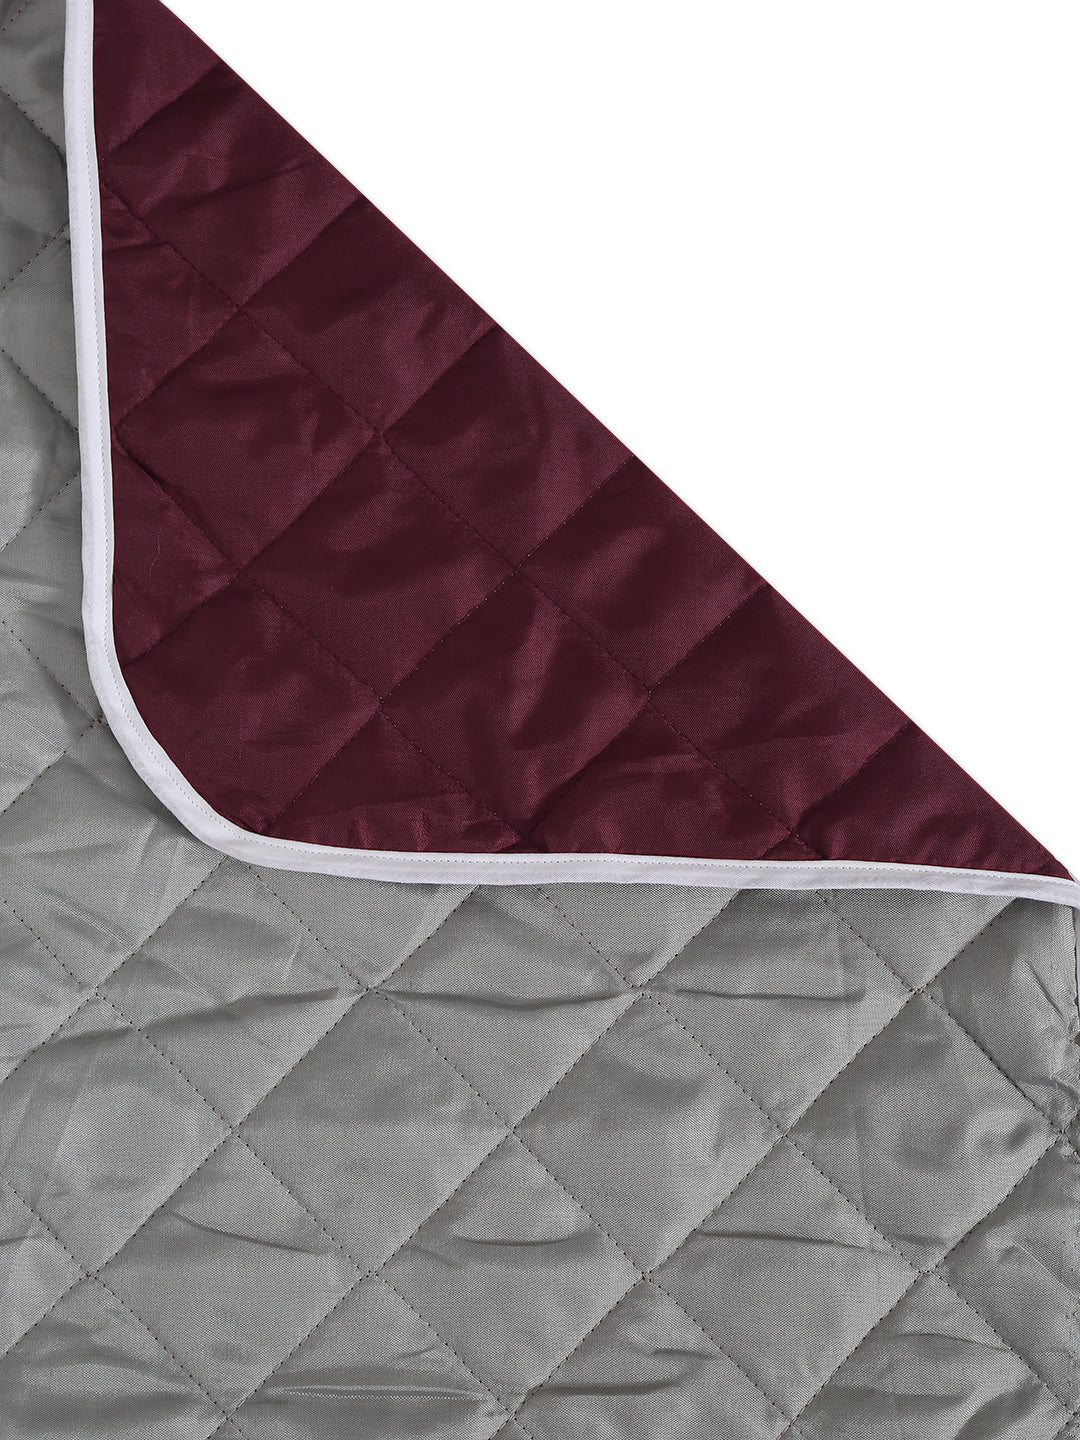 Reversible Quilted Polyester Solid Sofa Cover 2 Seater- Maroon & Grey